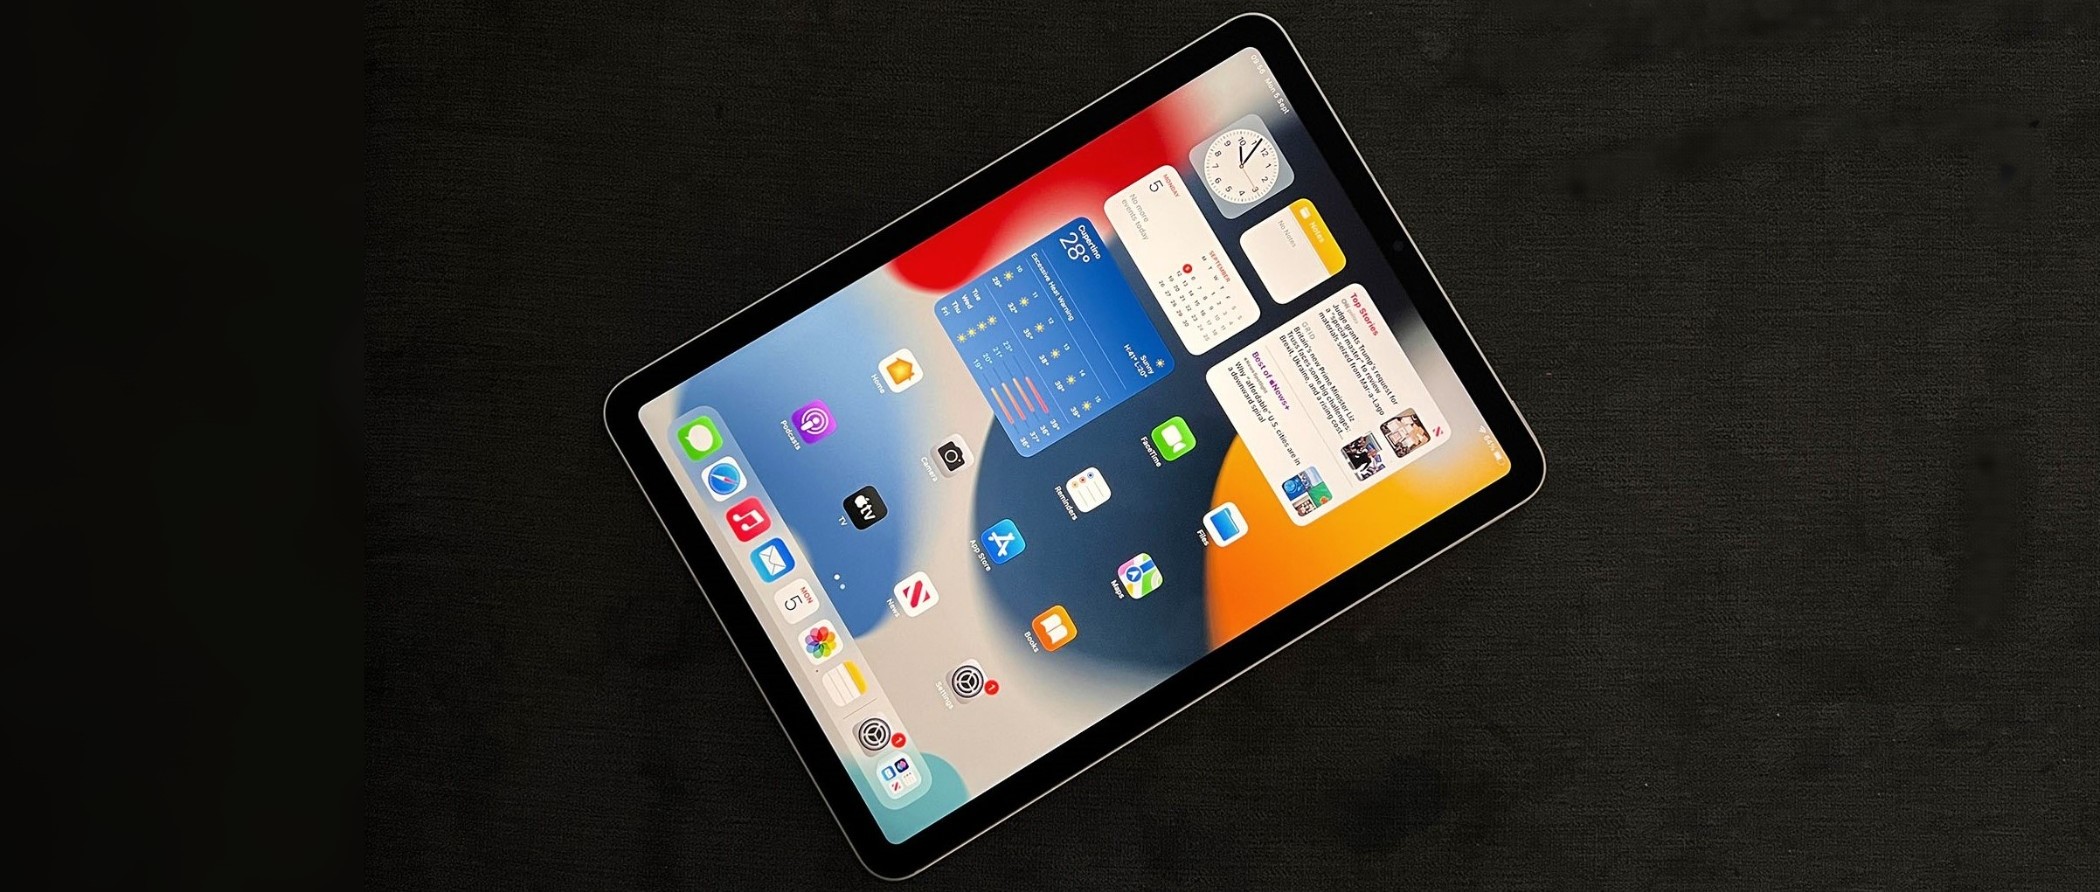 Apple iPad Air 2020 Price, Release Date, Specs, and Features